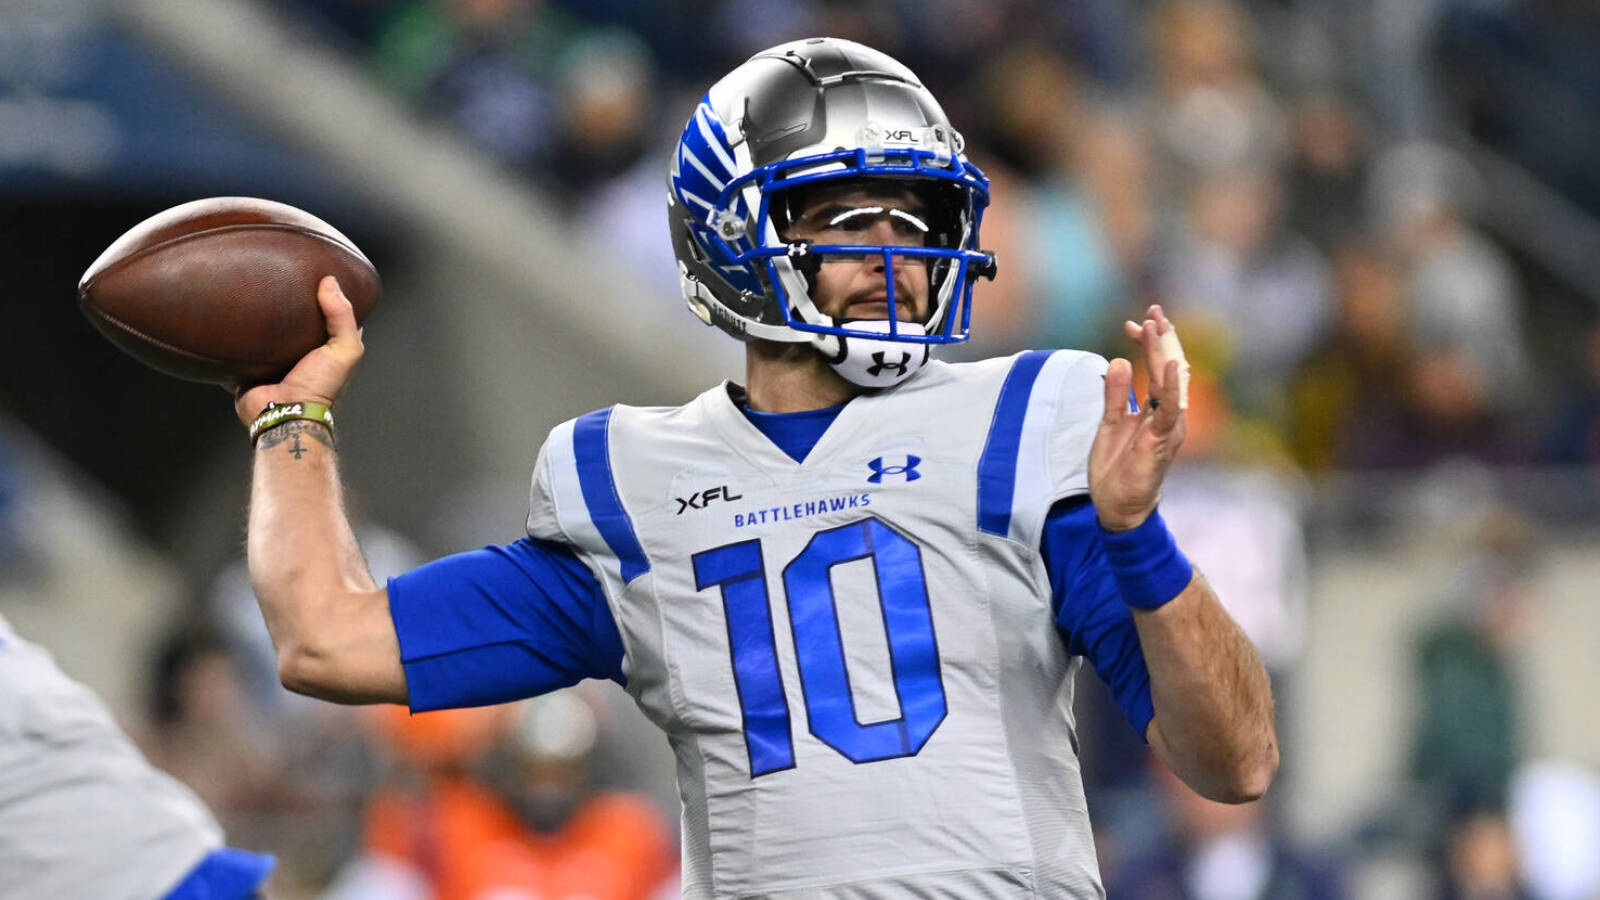 Former Ole Miss QB signed with the St. Louis BattleHawks